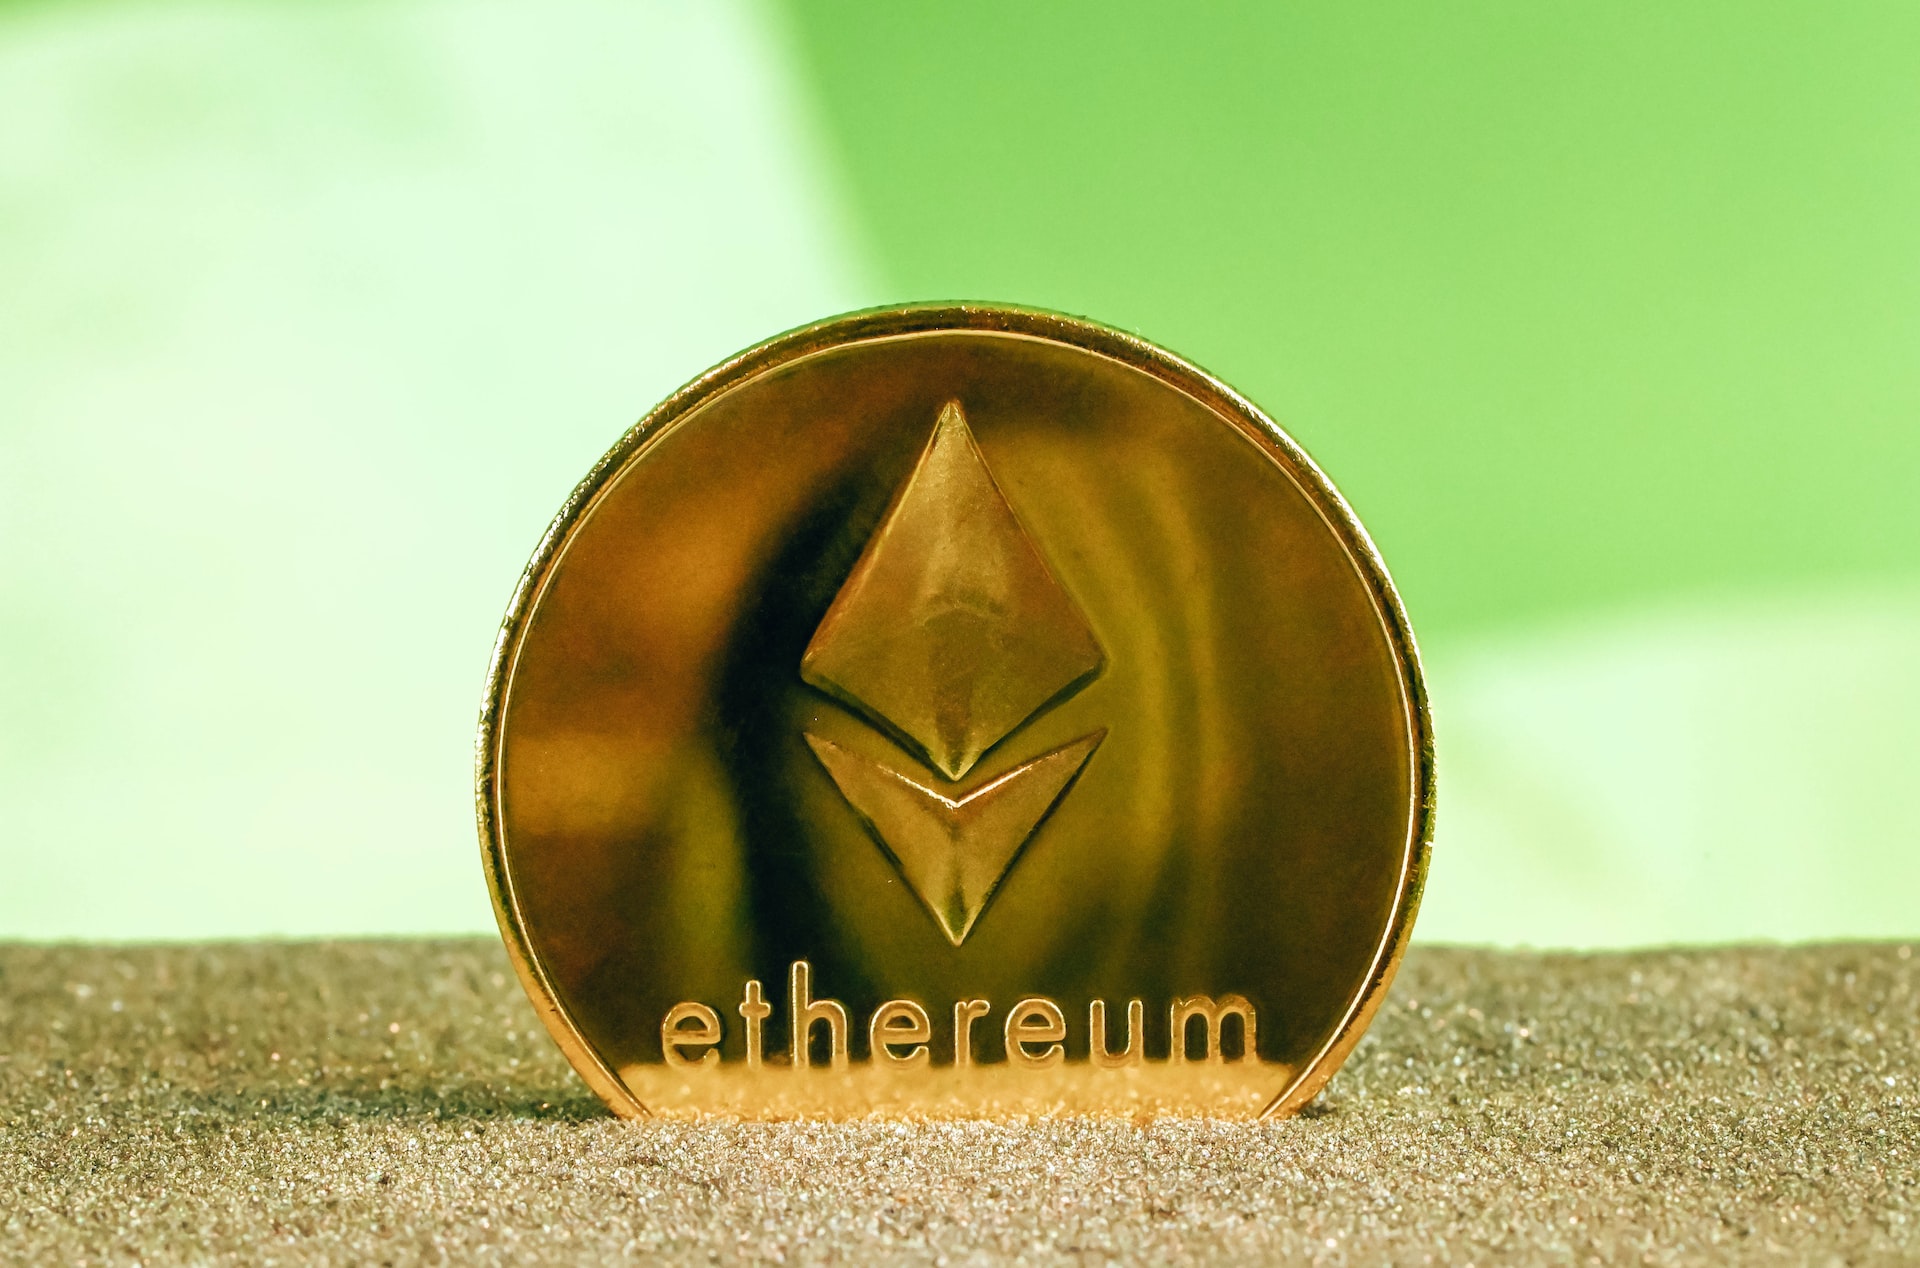 Ethereum Price Faces Sell Off, How Far Is The Correction Going To Go?